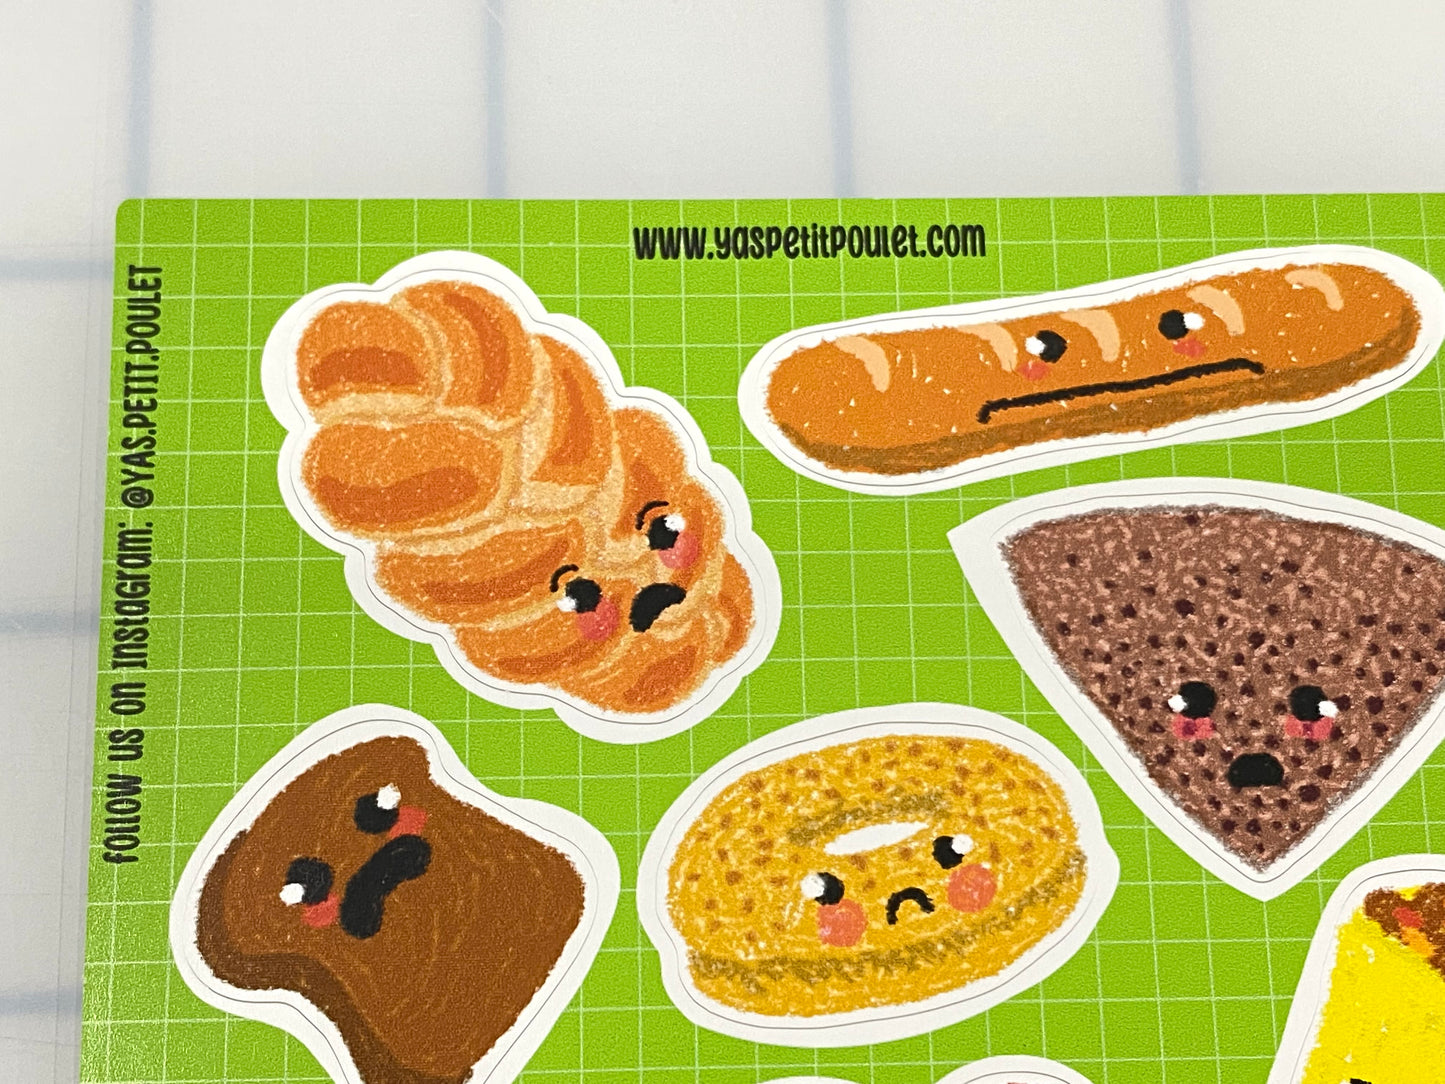 What kind of PAIN | Stickers Sheet